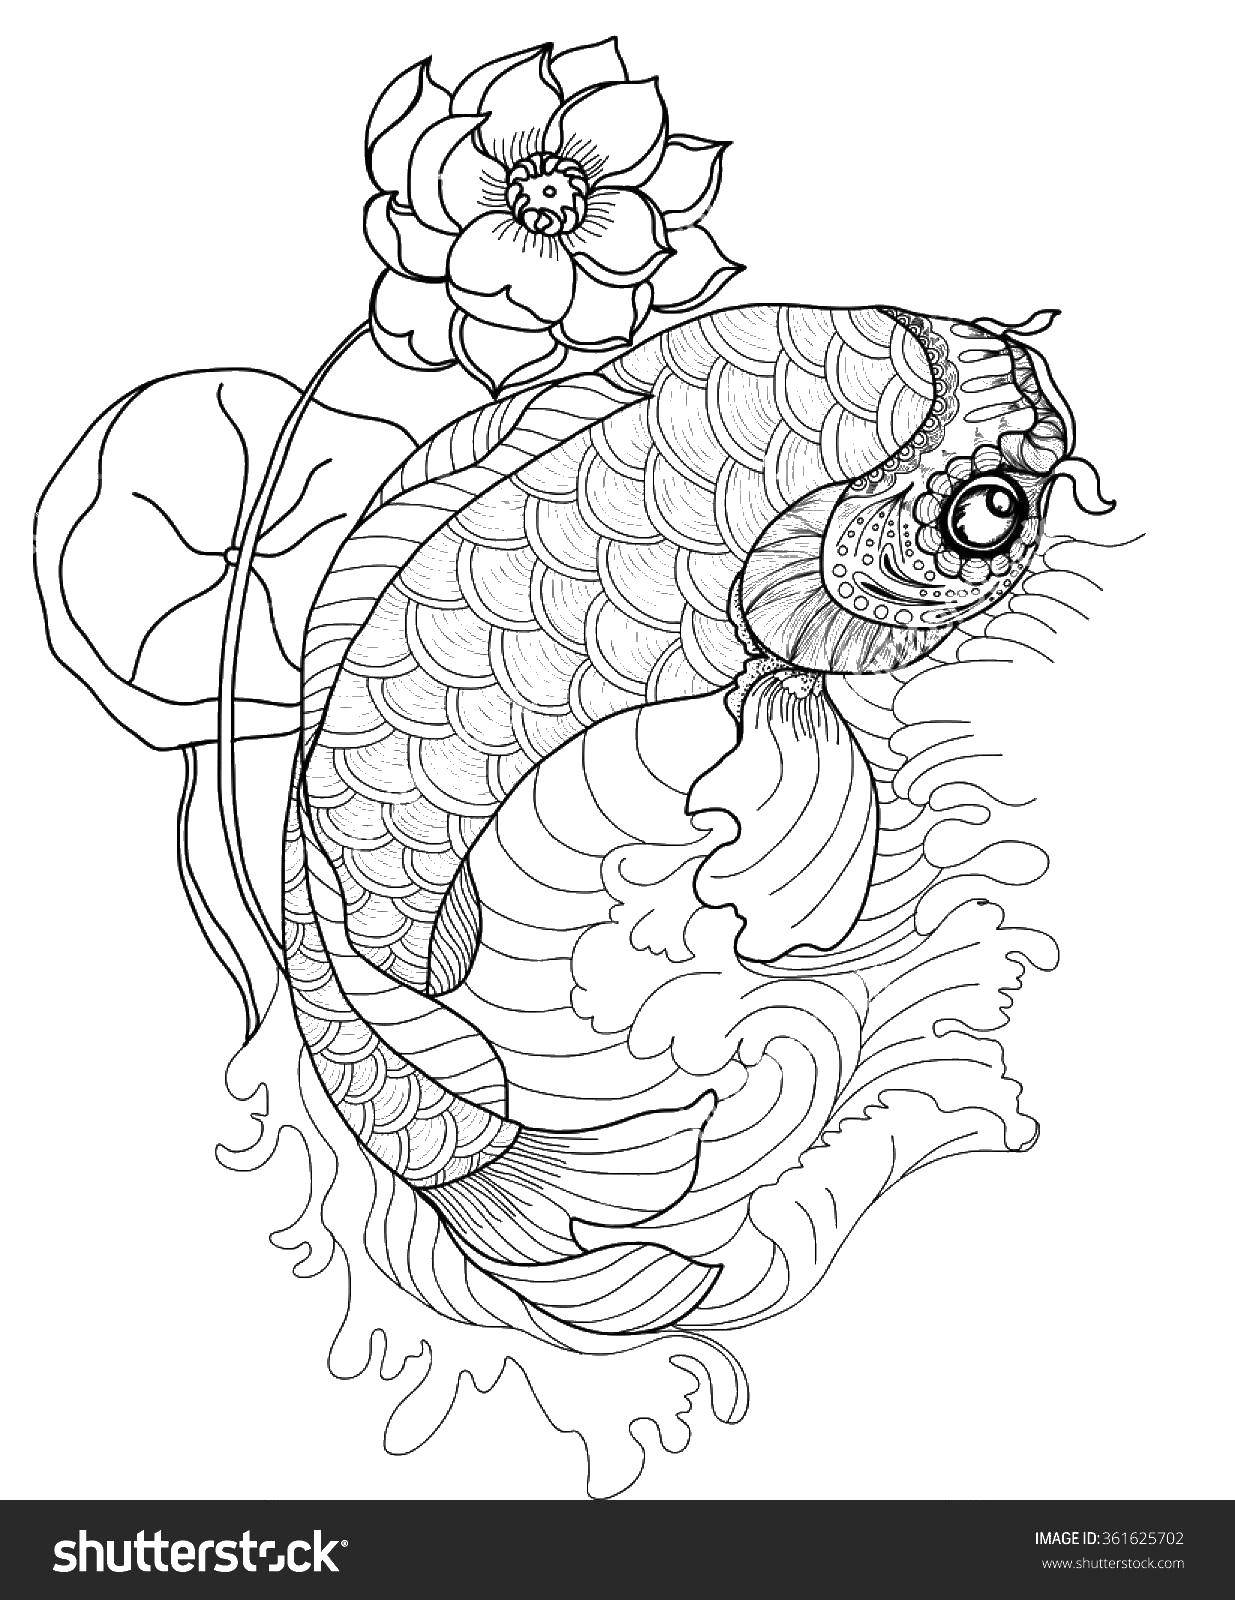 Coloring Fish and flower. Category fish. Tags:  fish, flowers, patterns.